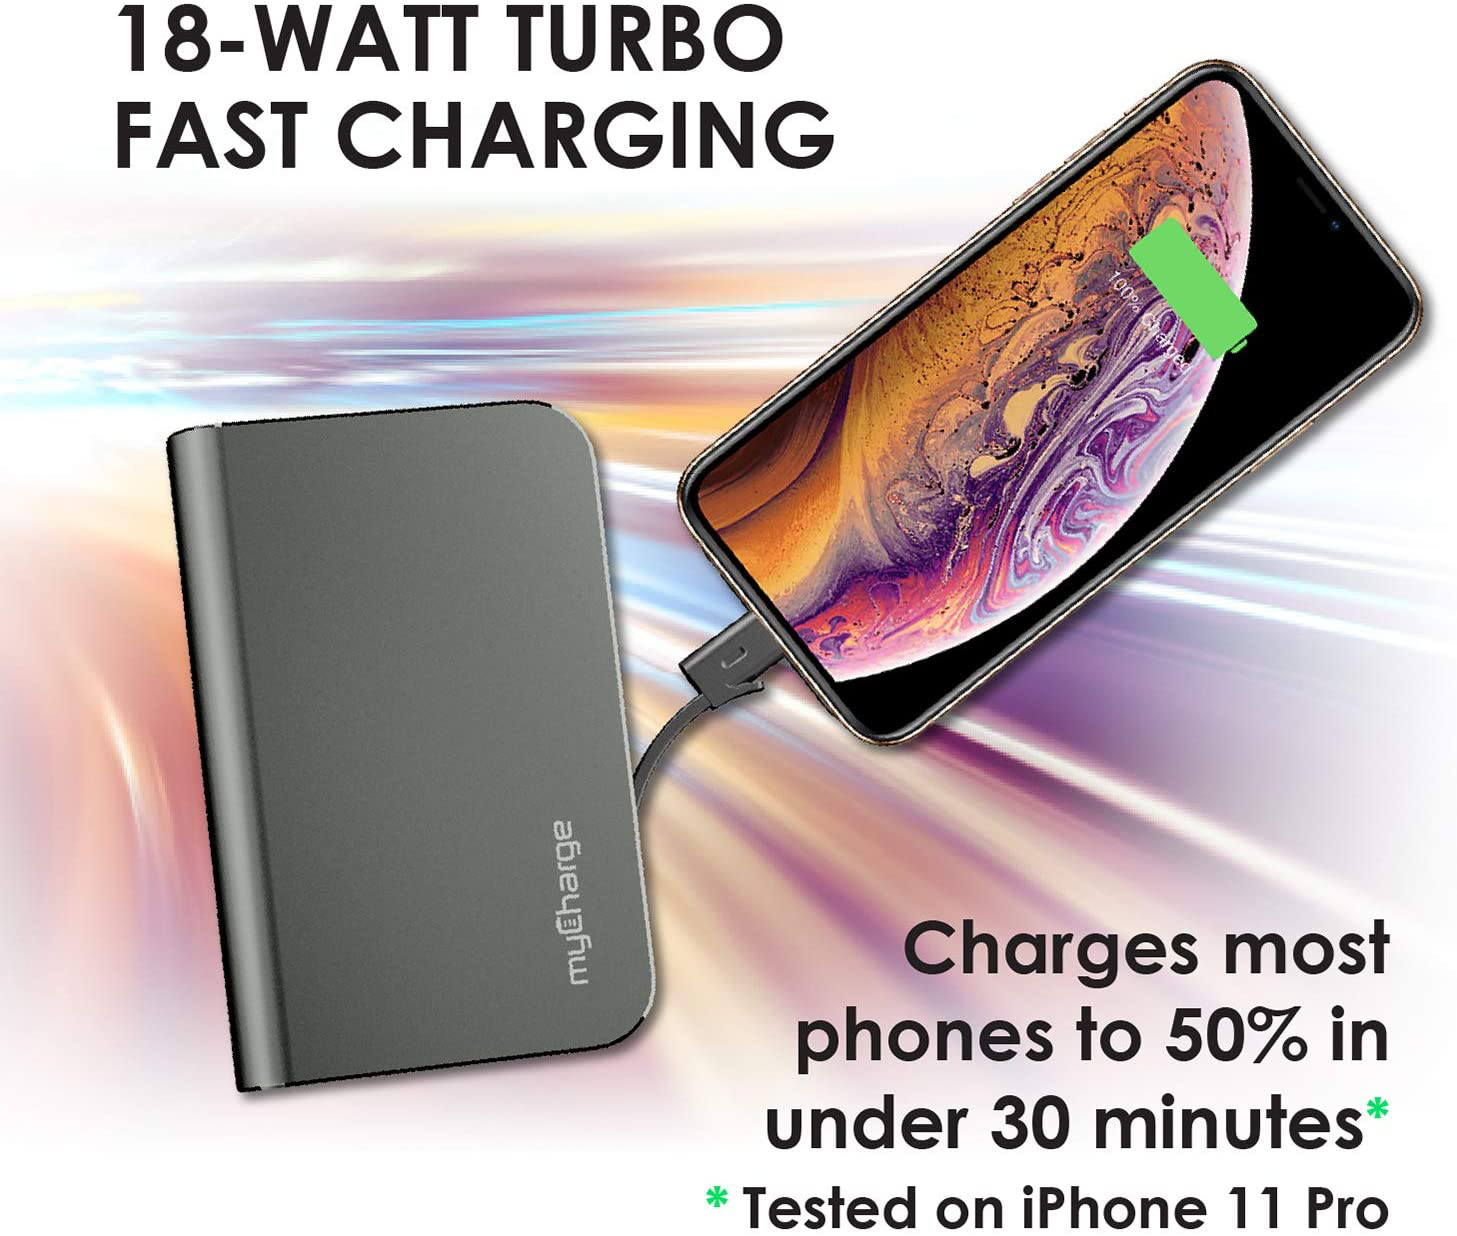 myCharge Portable Charger for iPhone Built in Cable USB C Power Bank Fast Charging Hub Turbo 18W / 10050mAh (Lightning, Type C) Wall Plug External Battery Pack Backup for Apple, Android, 55 Hrs